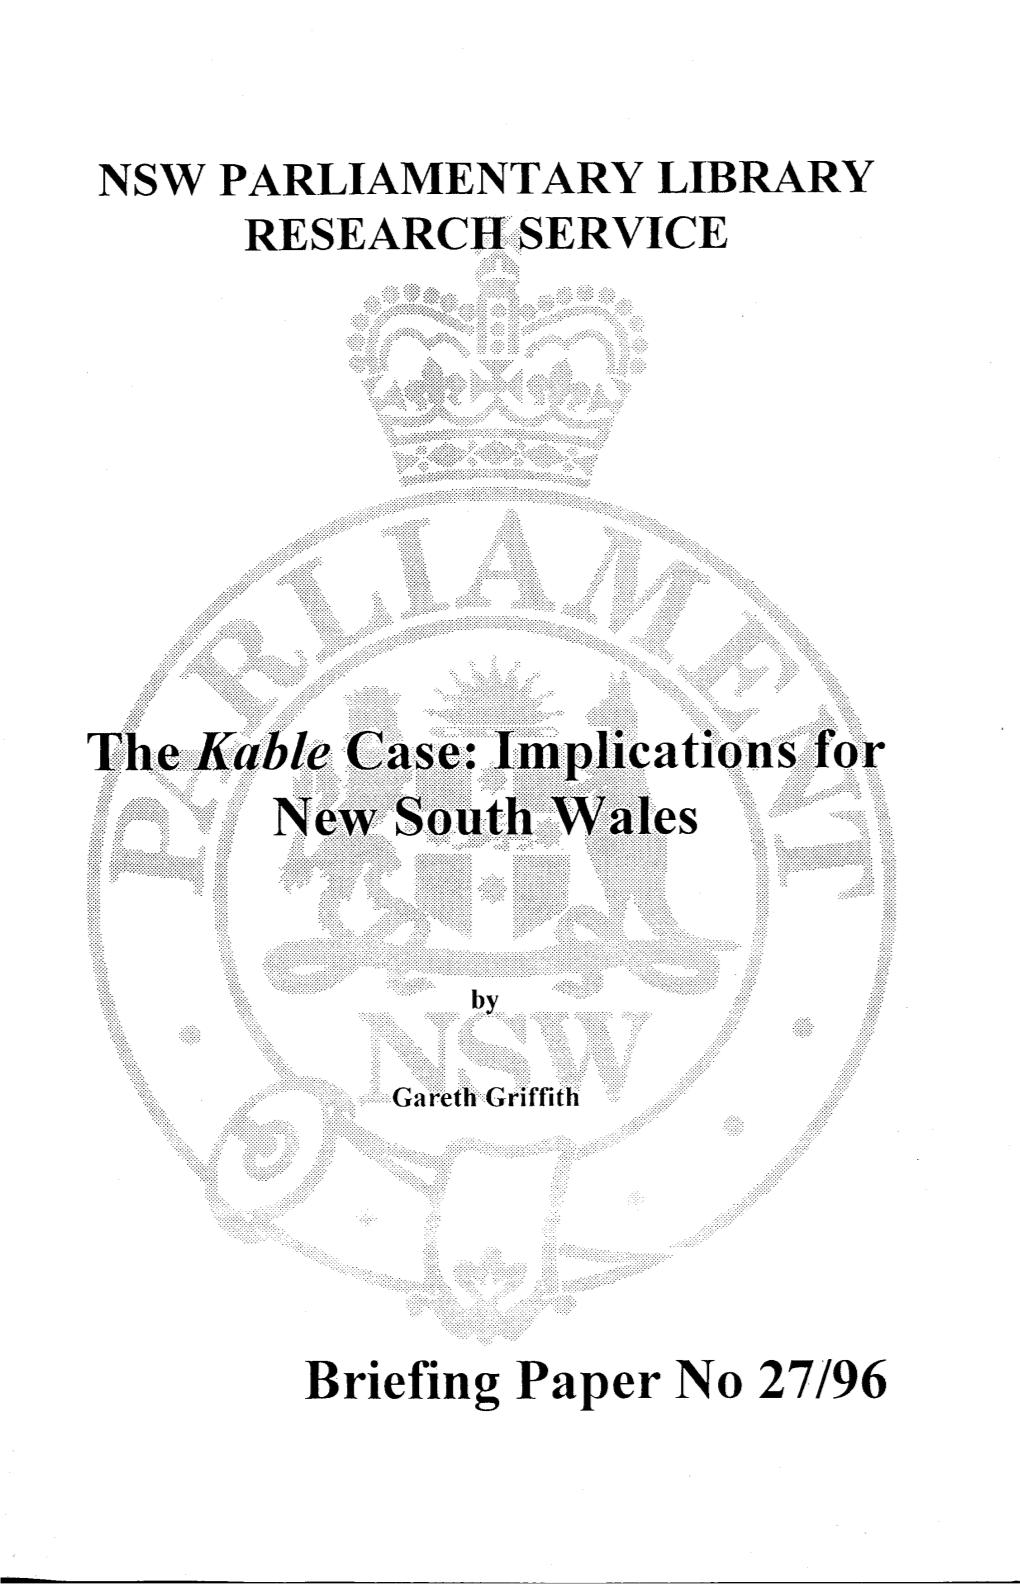 Briefing Paper No 27/96 the Kable Case: Implications for New South Wales